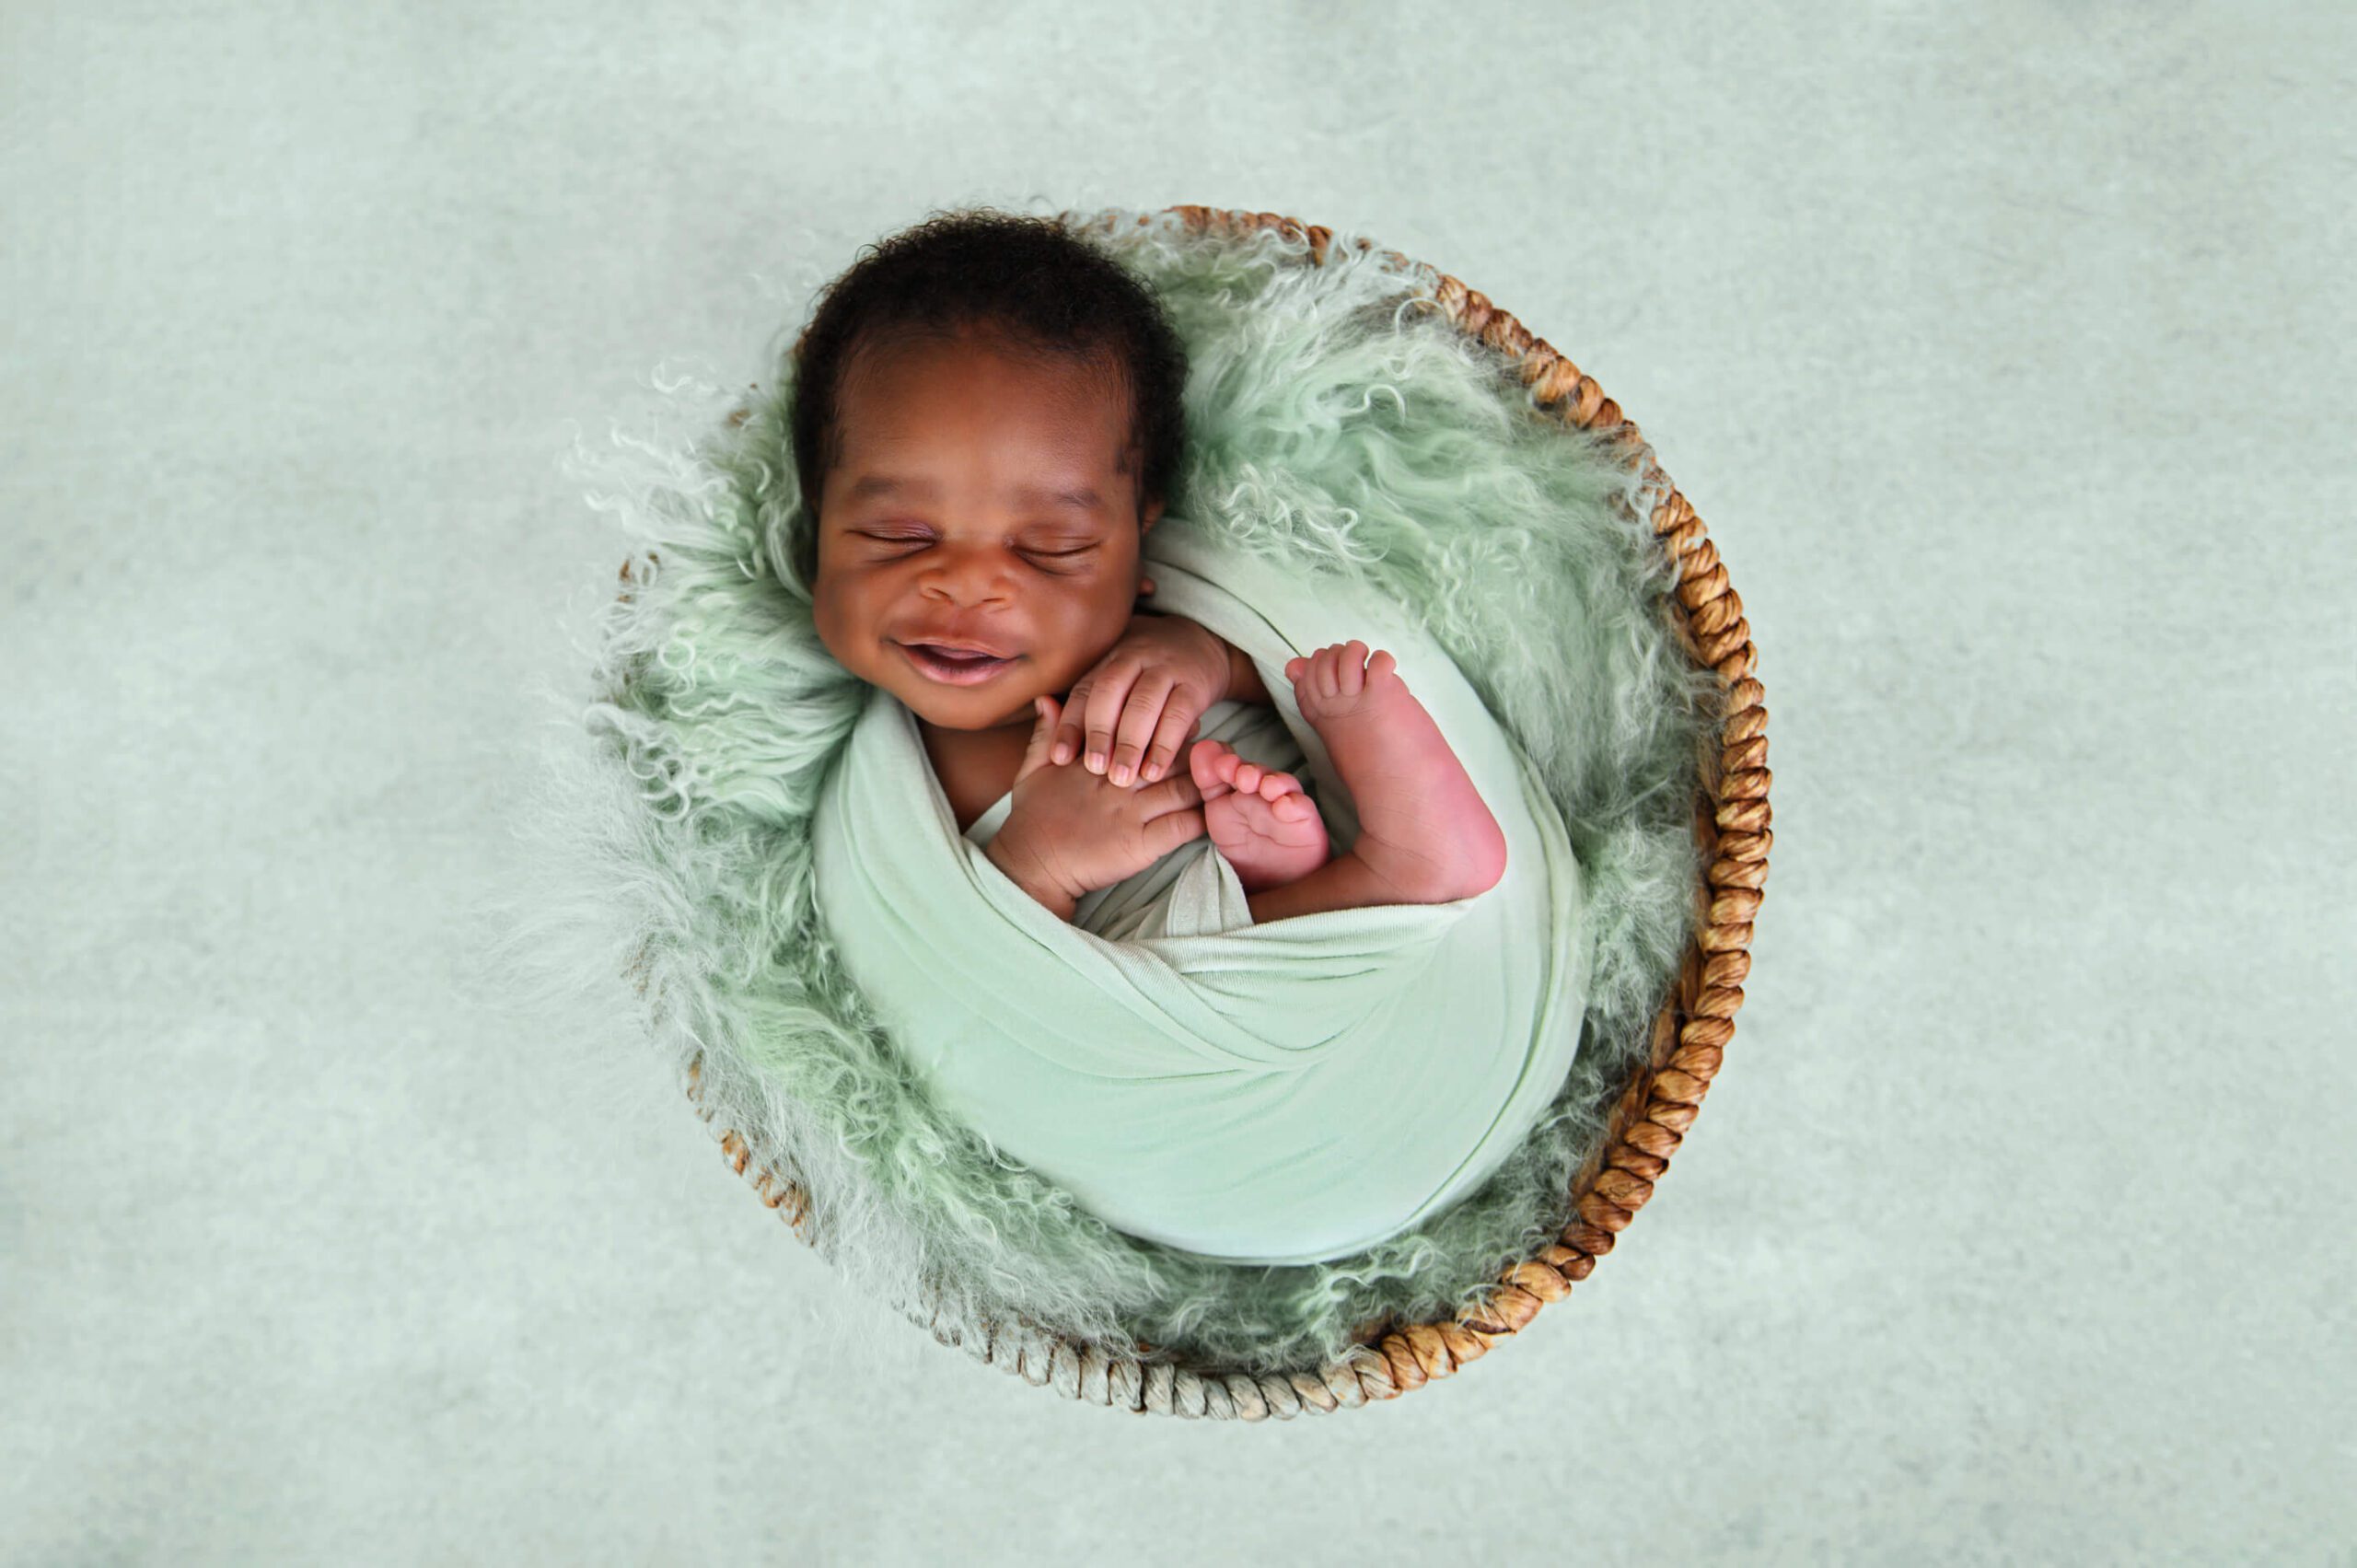 Newborn baby boy smiling in a mint green warp and fur rug.